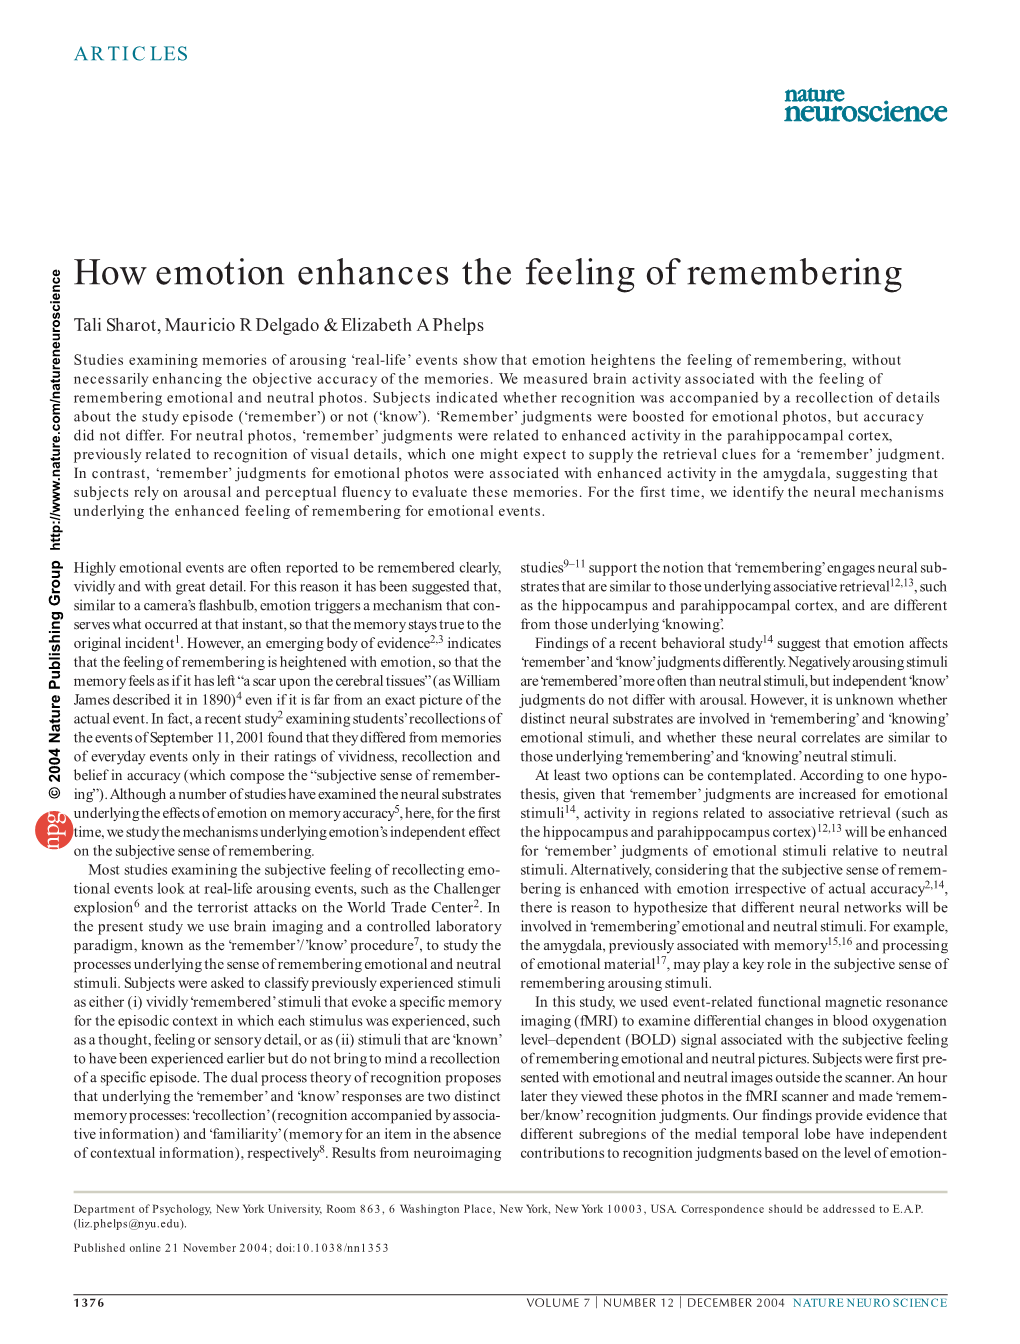 How Emotion Enhances the Feeling of Remembering